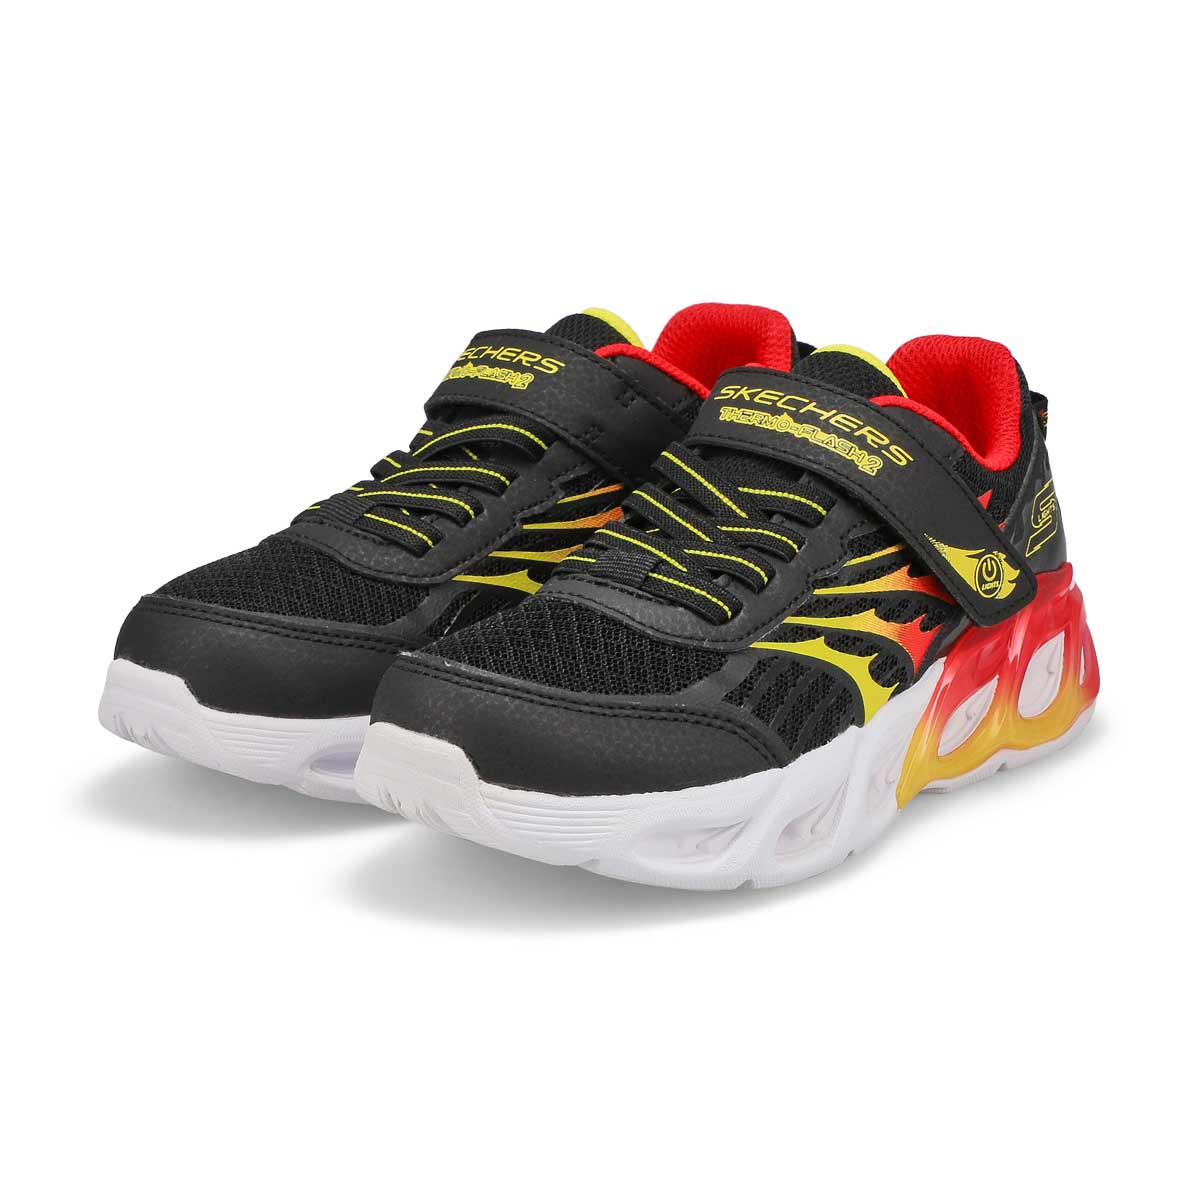 Boys' Thermo-Flash 2.0 Sneaker - Black/Red